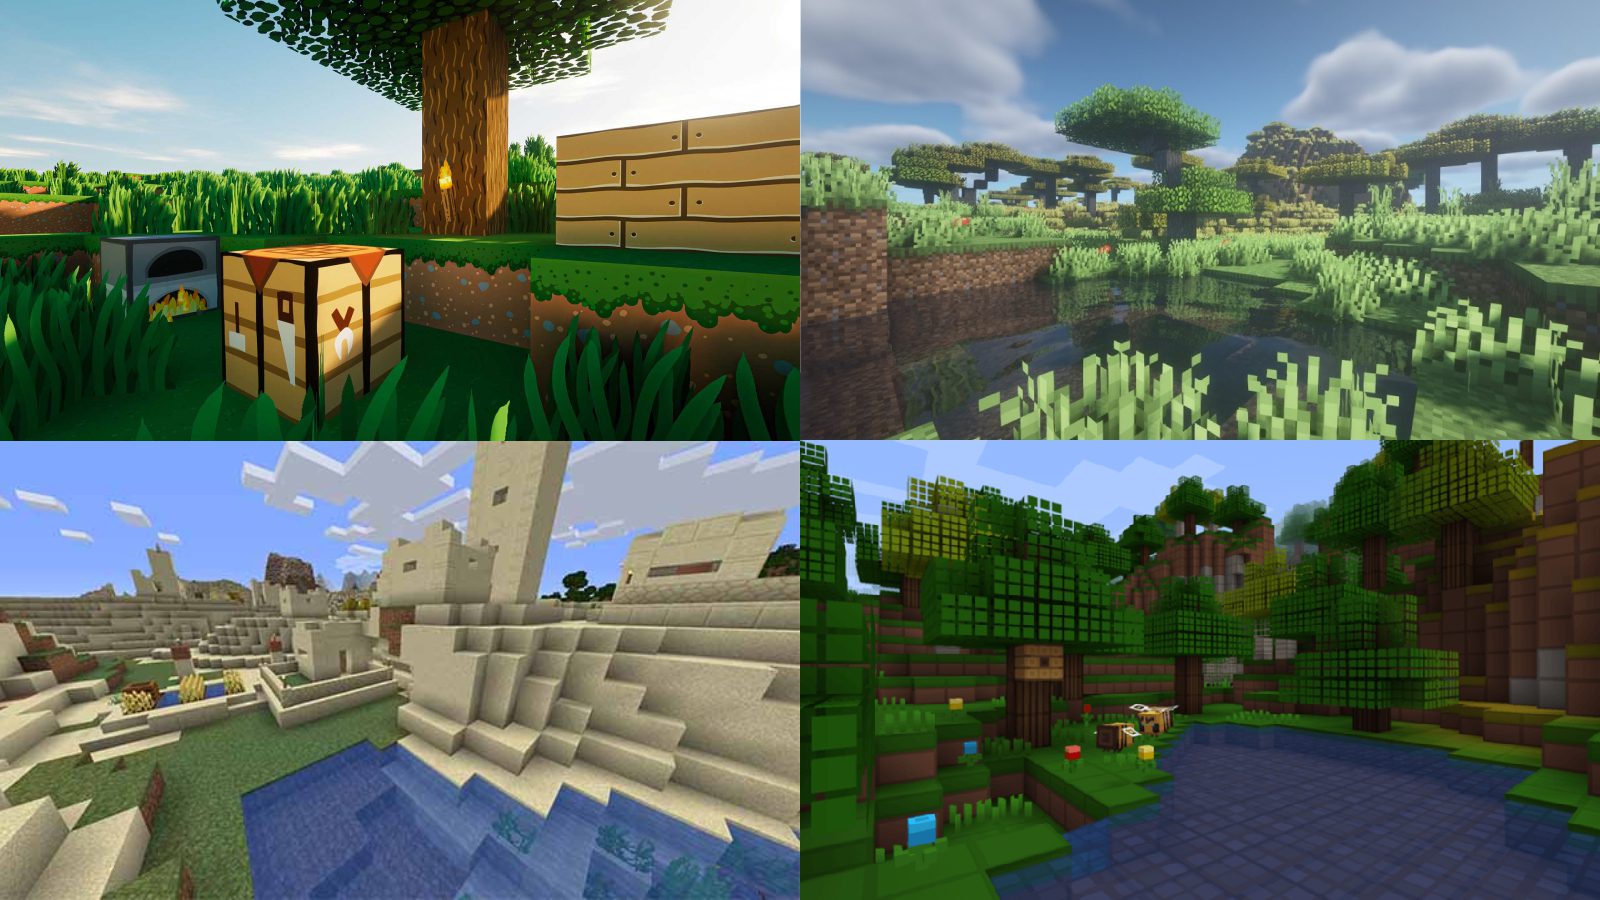 Best Minecraft 1.18 texture packs in May 2022